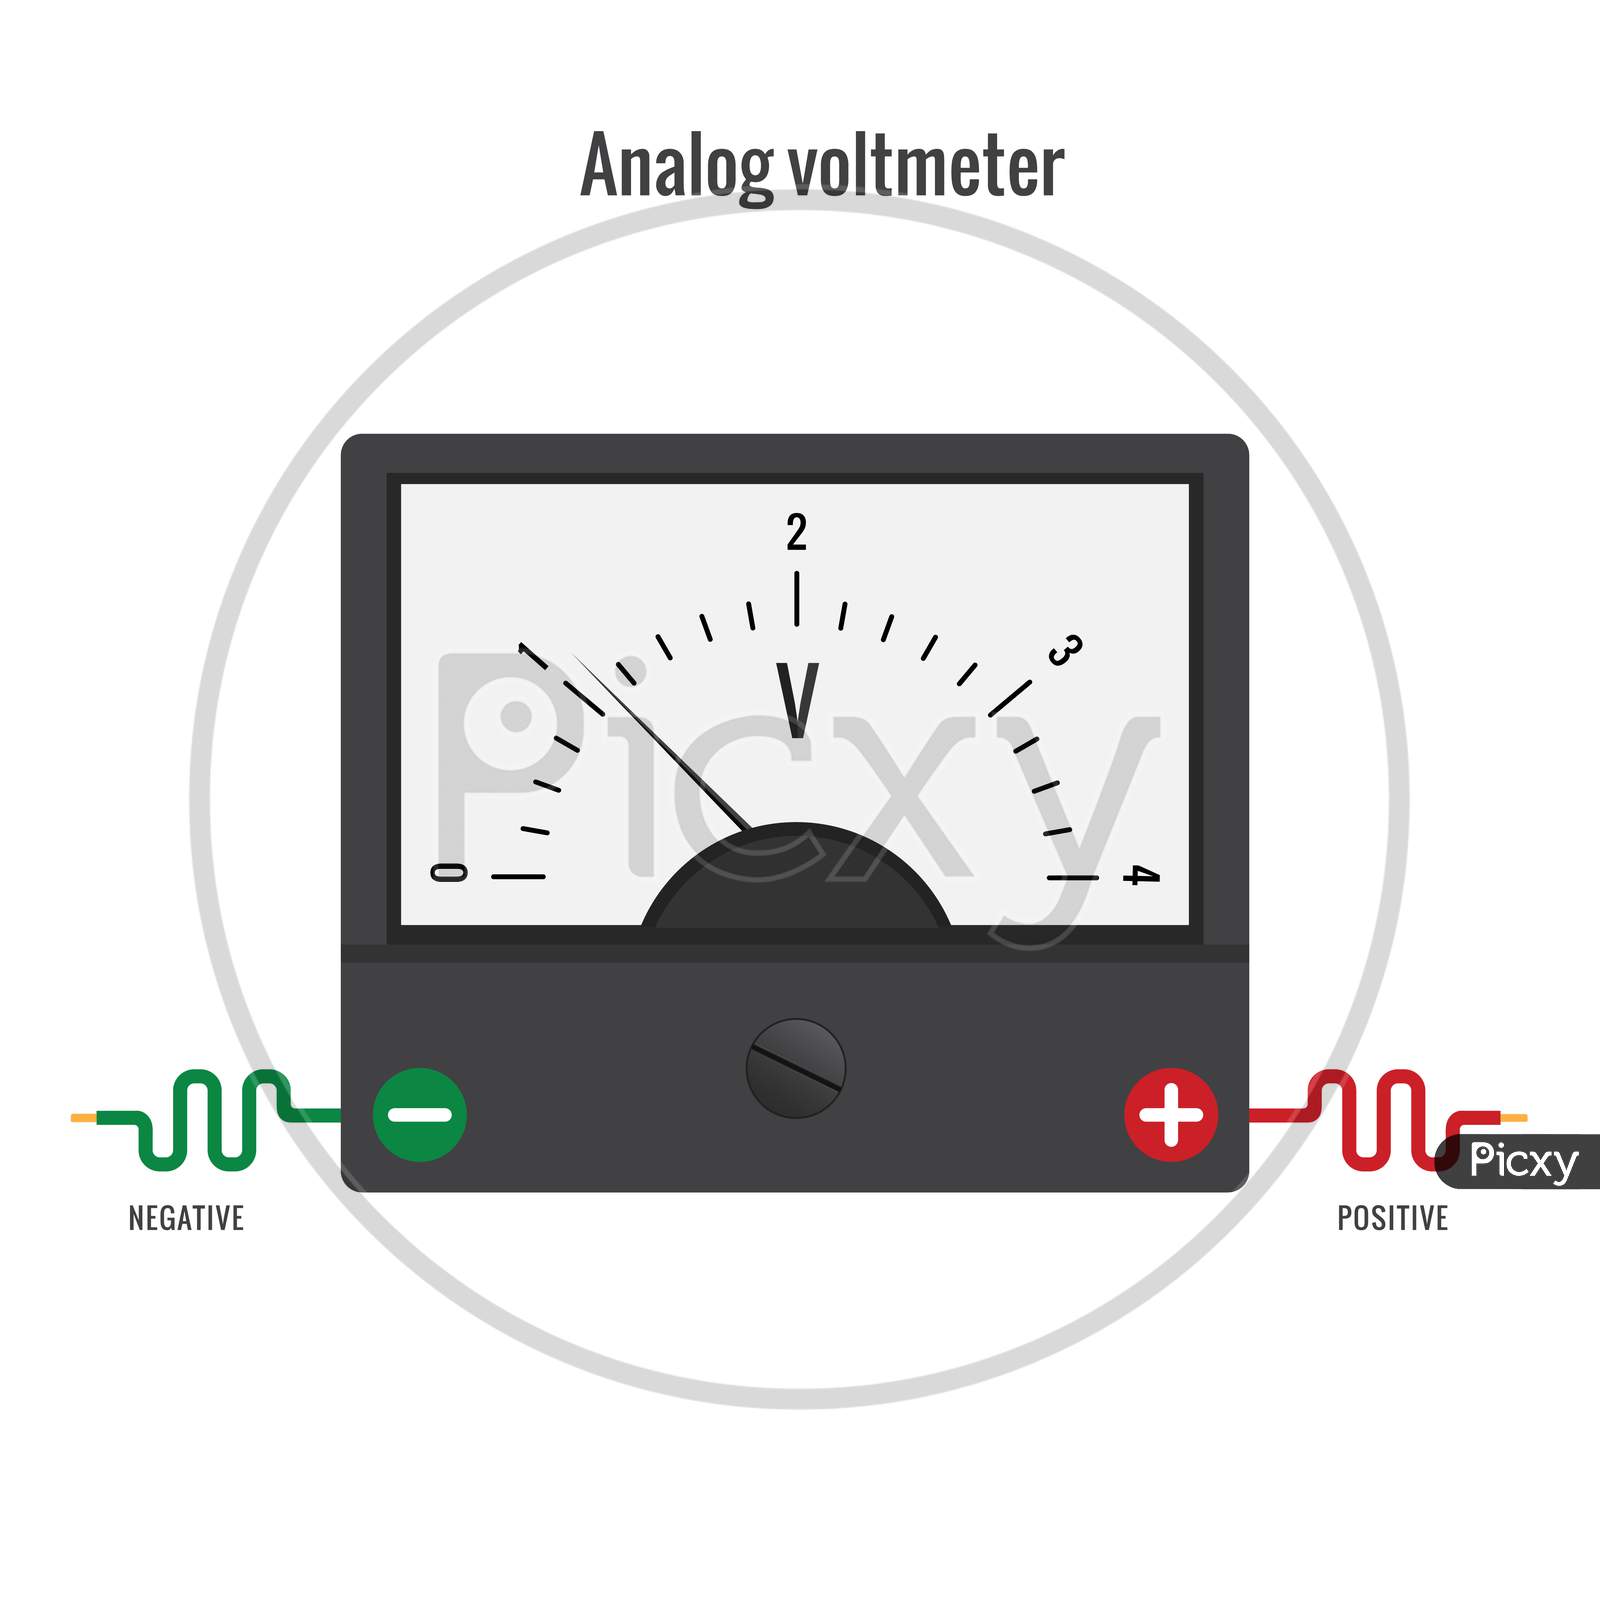 Voltmeter, Analog Voltmeter, Pointer And Scale Measuring The Voltage